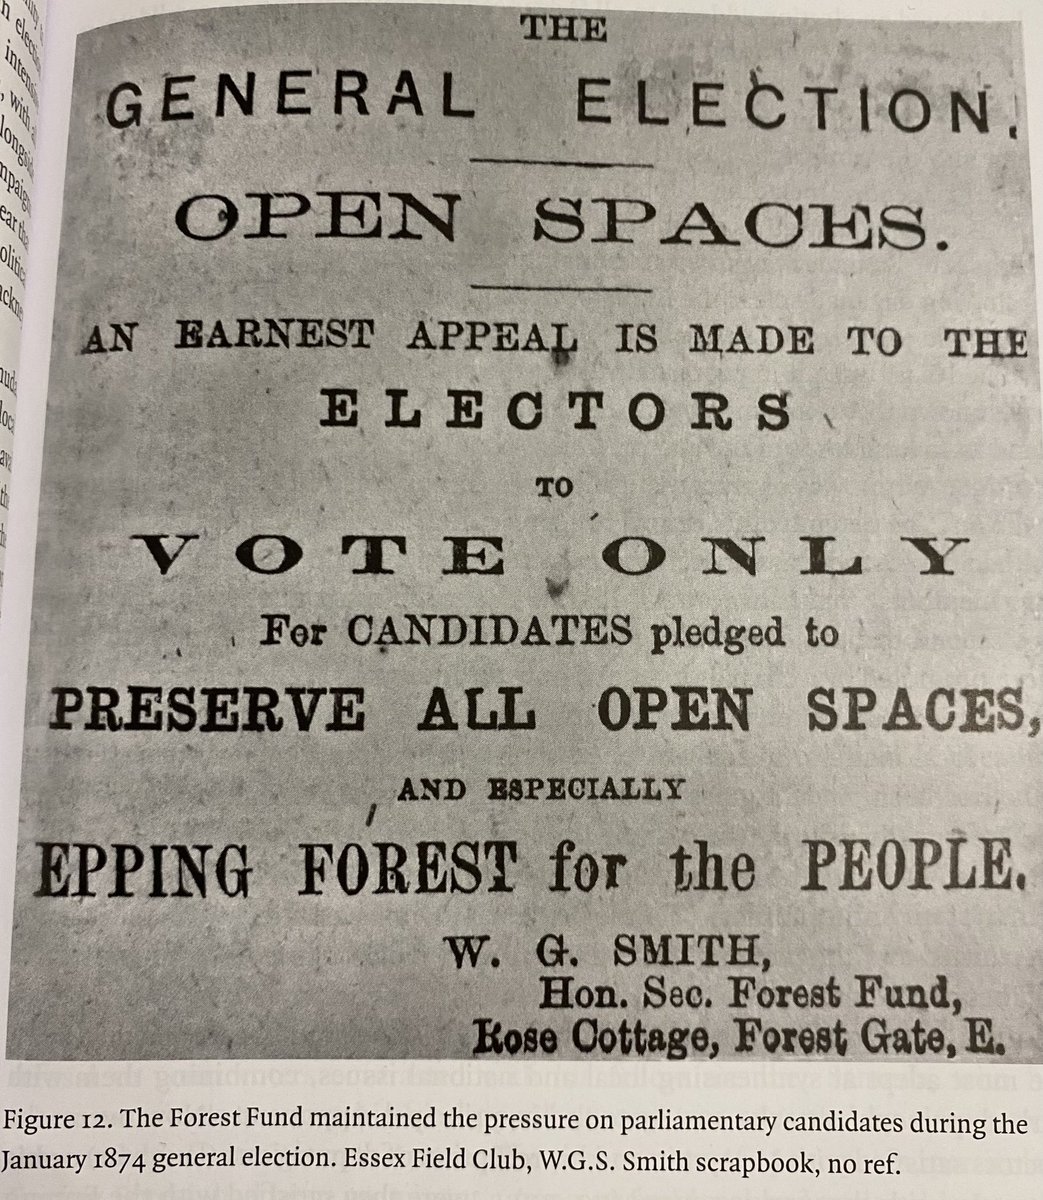 Evergreen advice from this Victorian election poster from 1874. Very much relevant to how you use your vote today, exactly 150 years later.